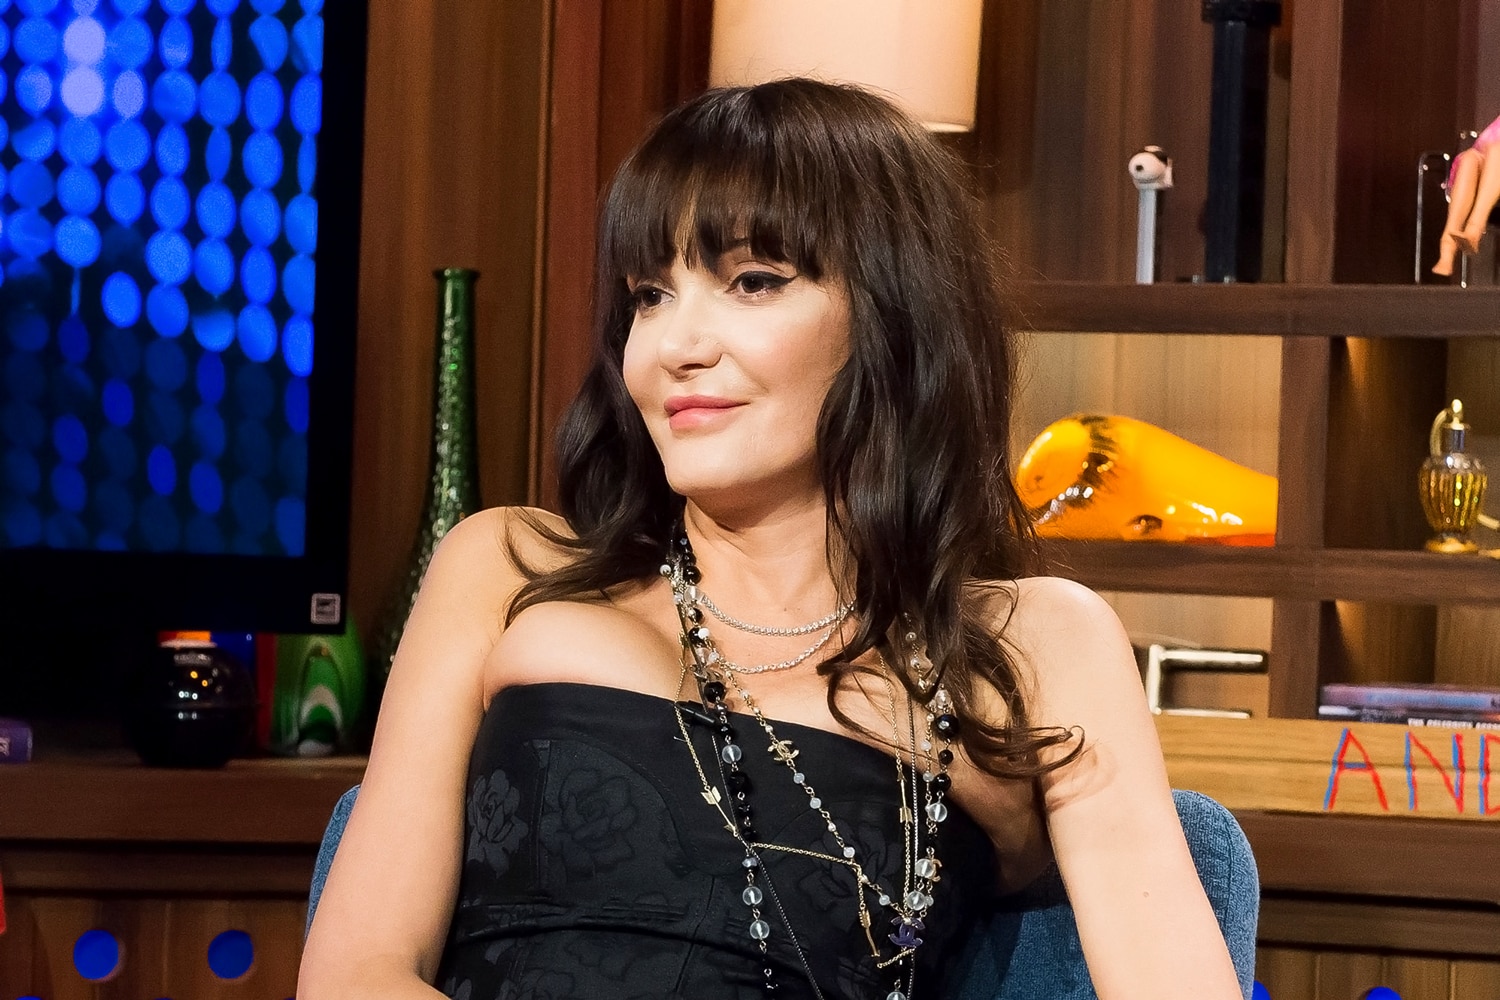 Annabelle Neilson: I Told People What They Needed to Hear.